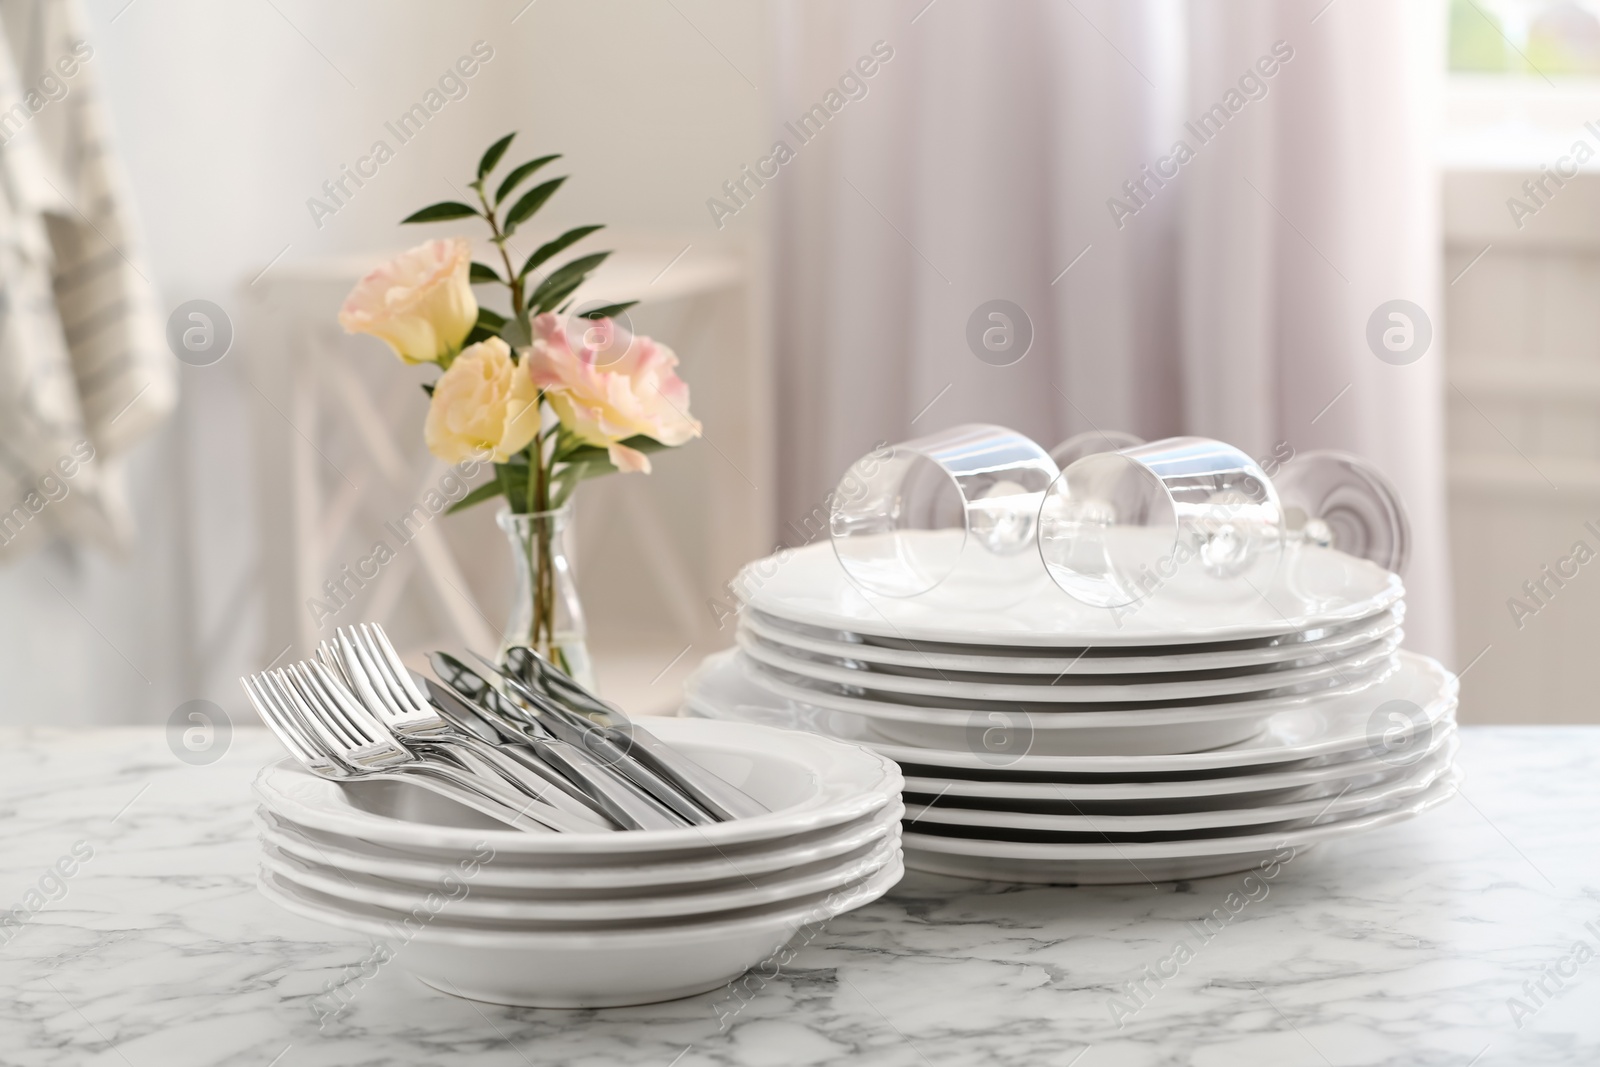 Photo of Set with clean dishes and vase of flowers on white marble table